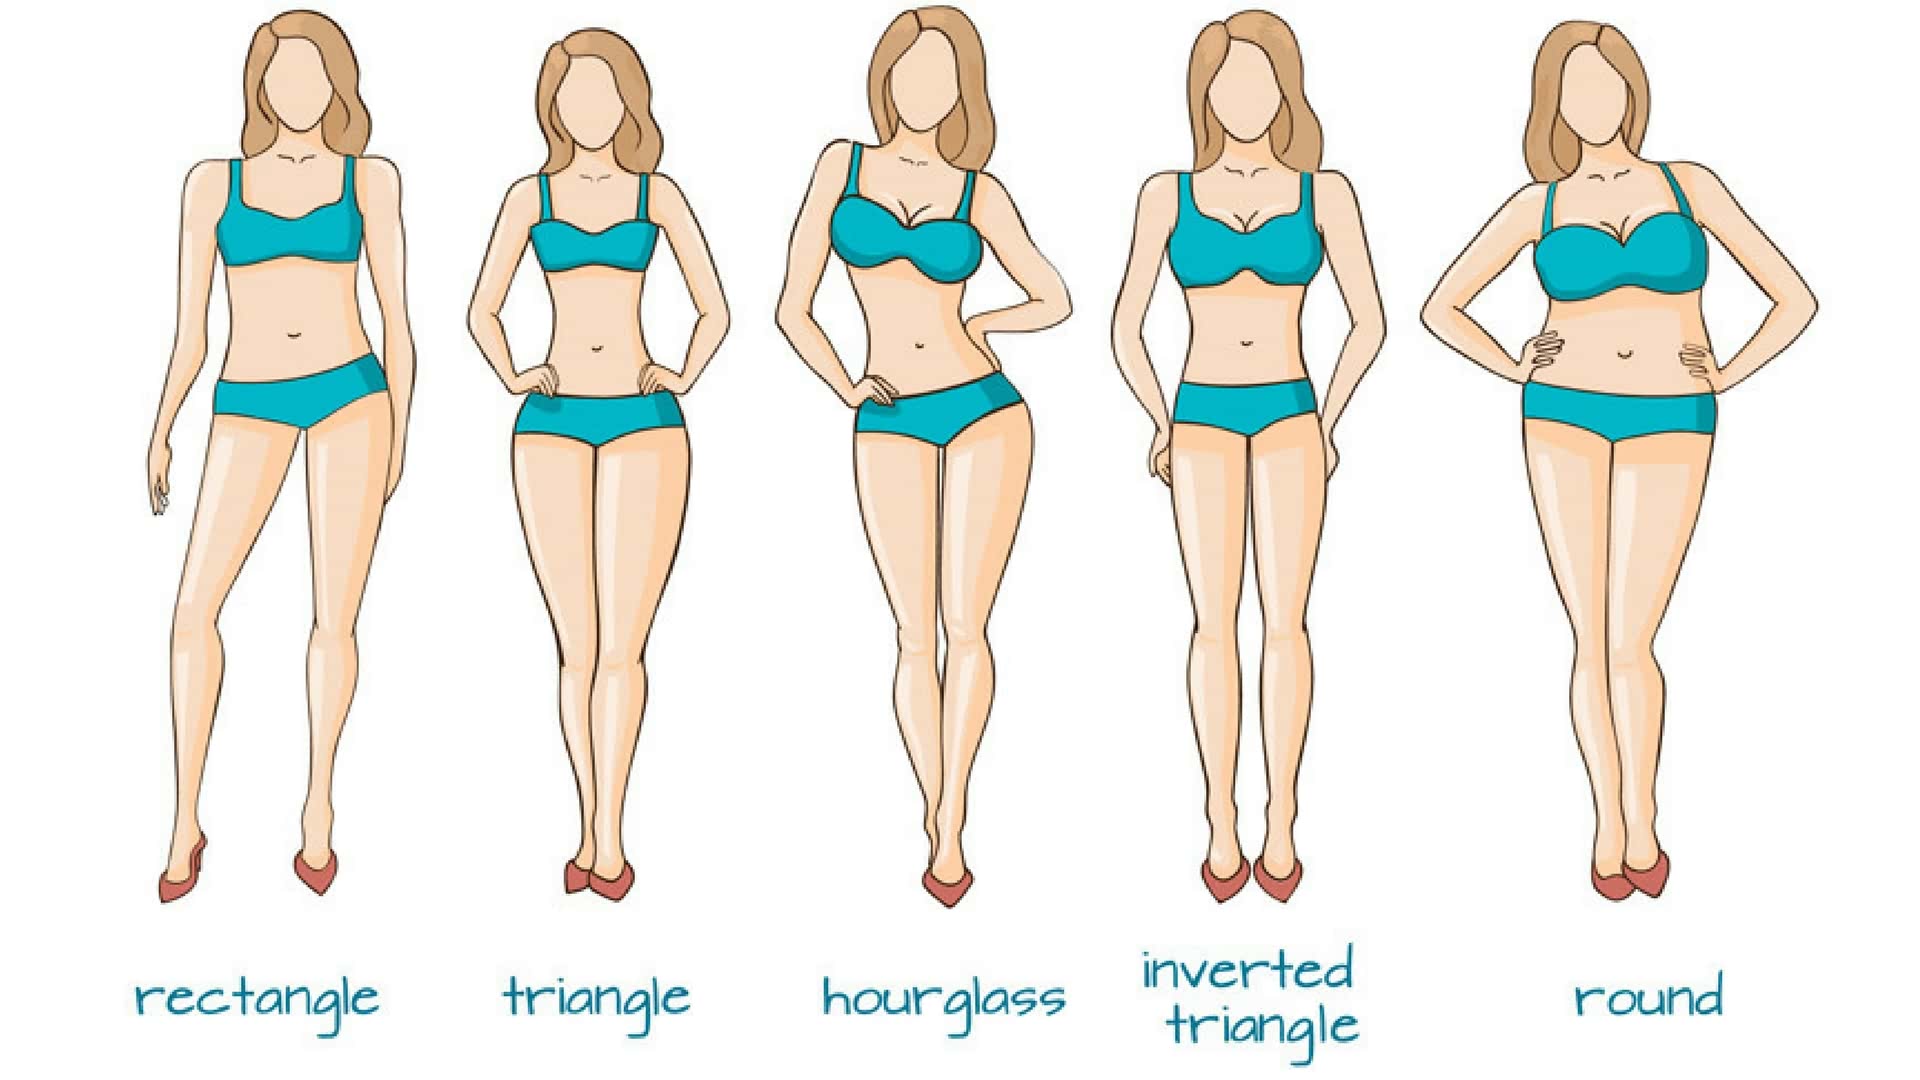 different body types - hourglass, apple, rectangle, triangle, and inverted triangle